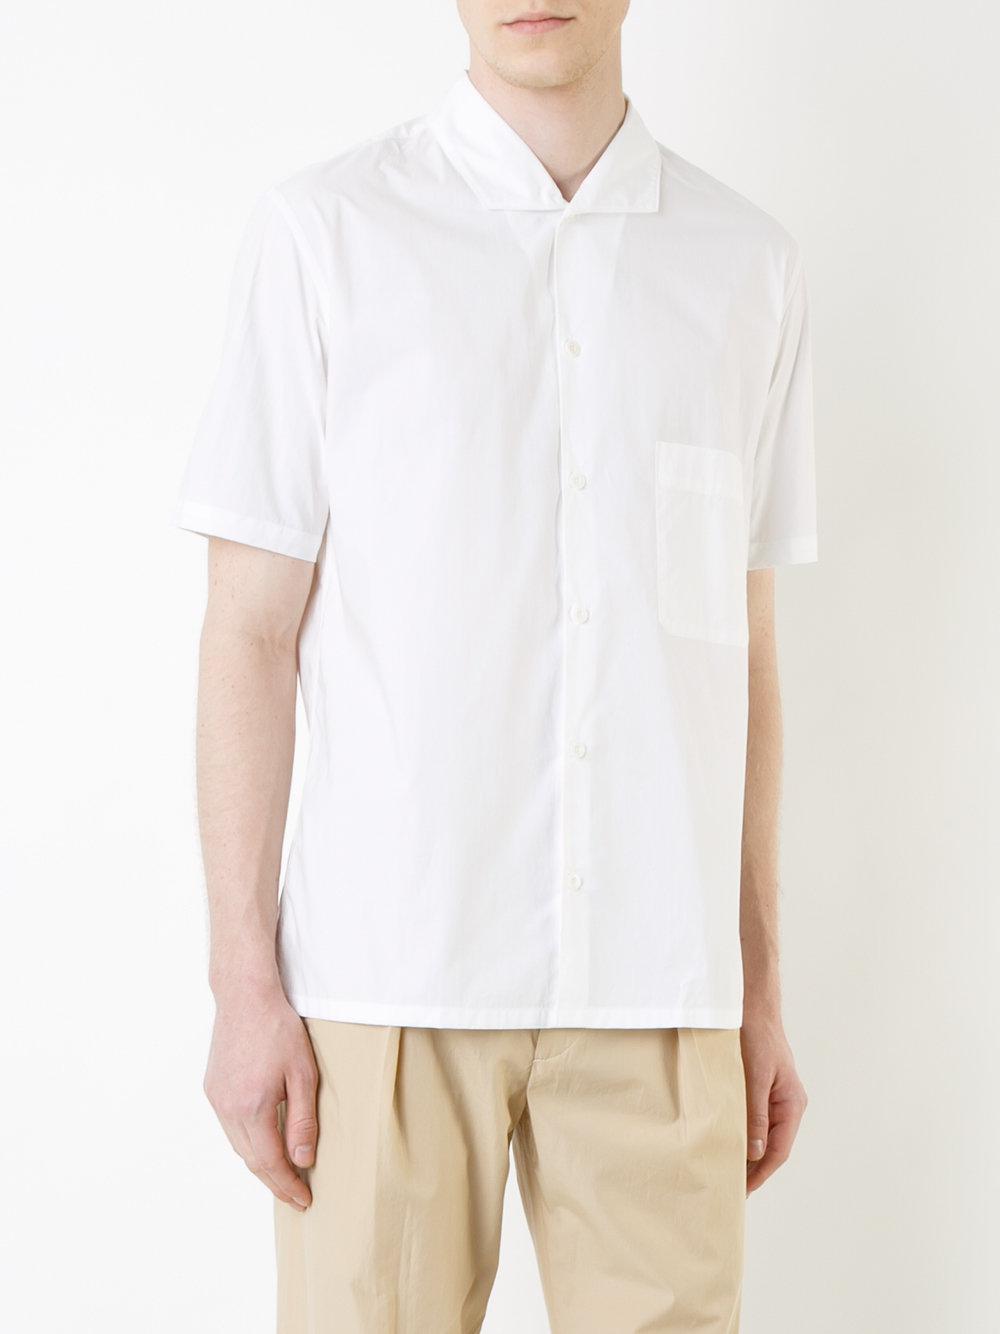 Lemaire Cotton Short Sleeve Shirt in White for Men - Lyst